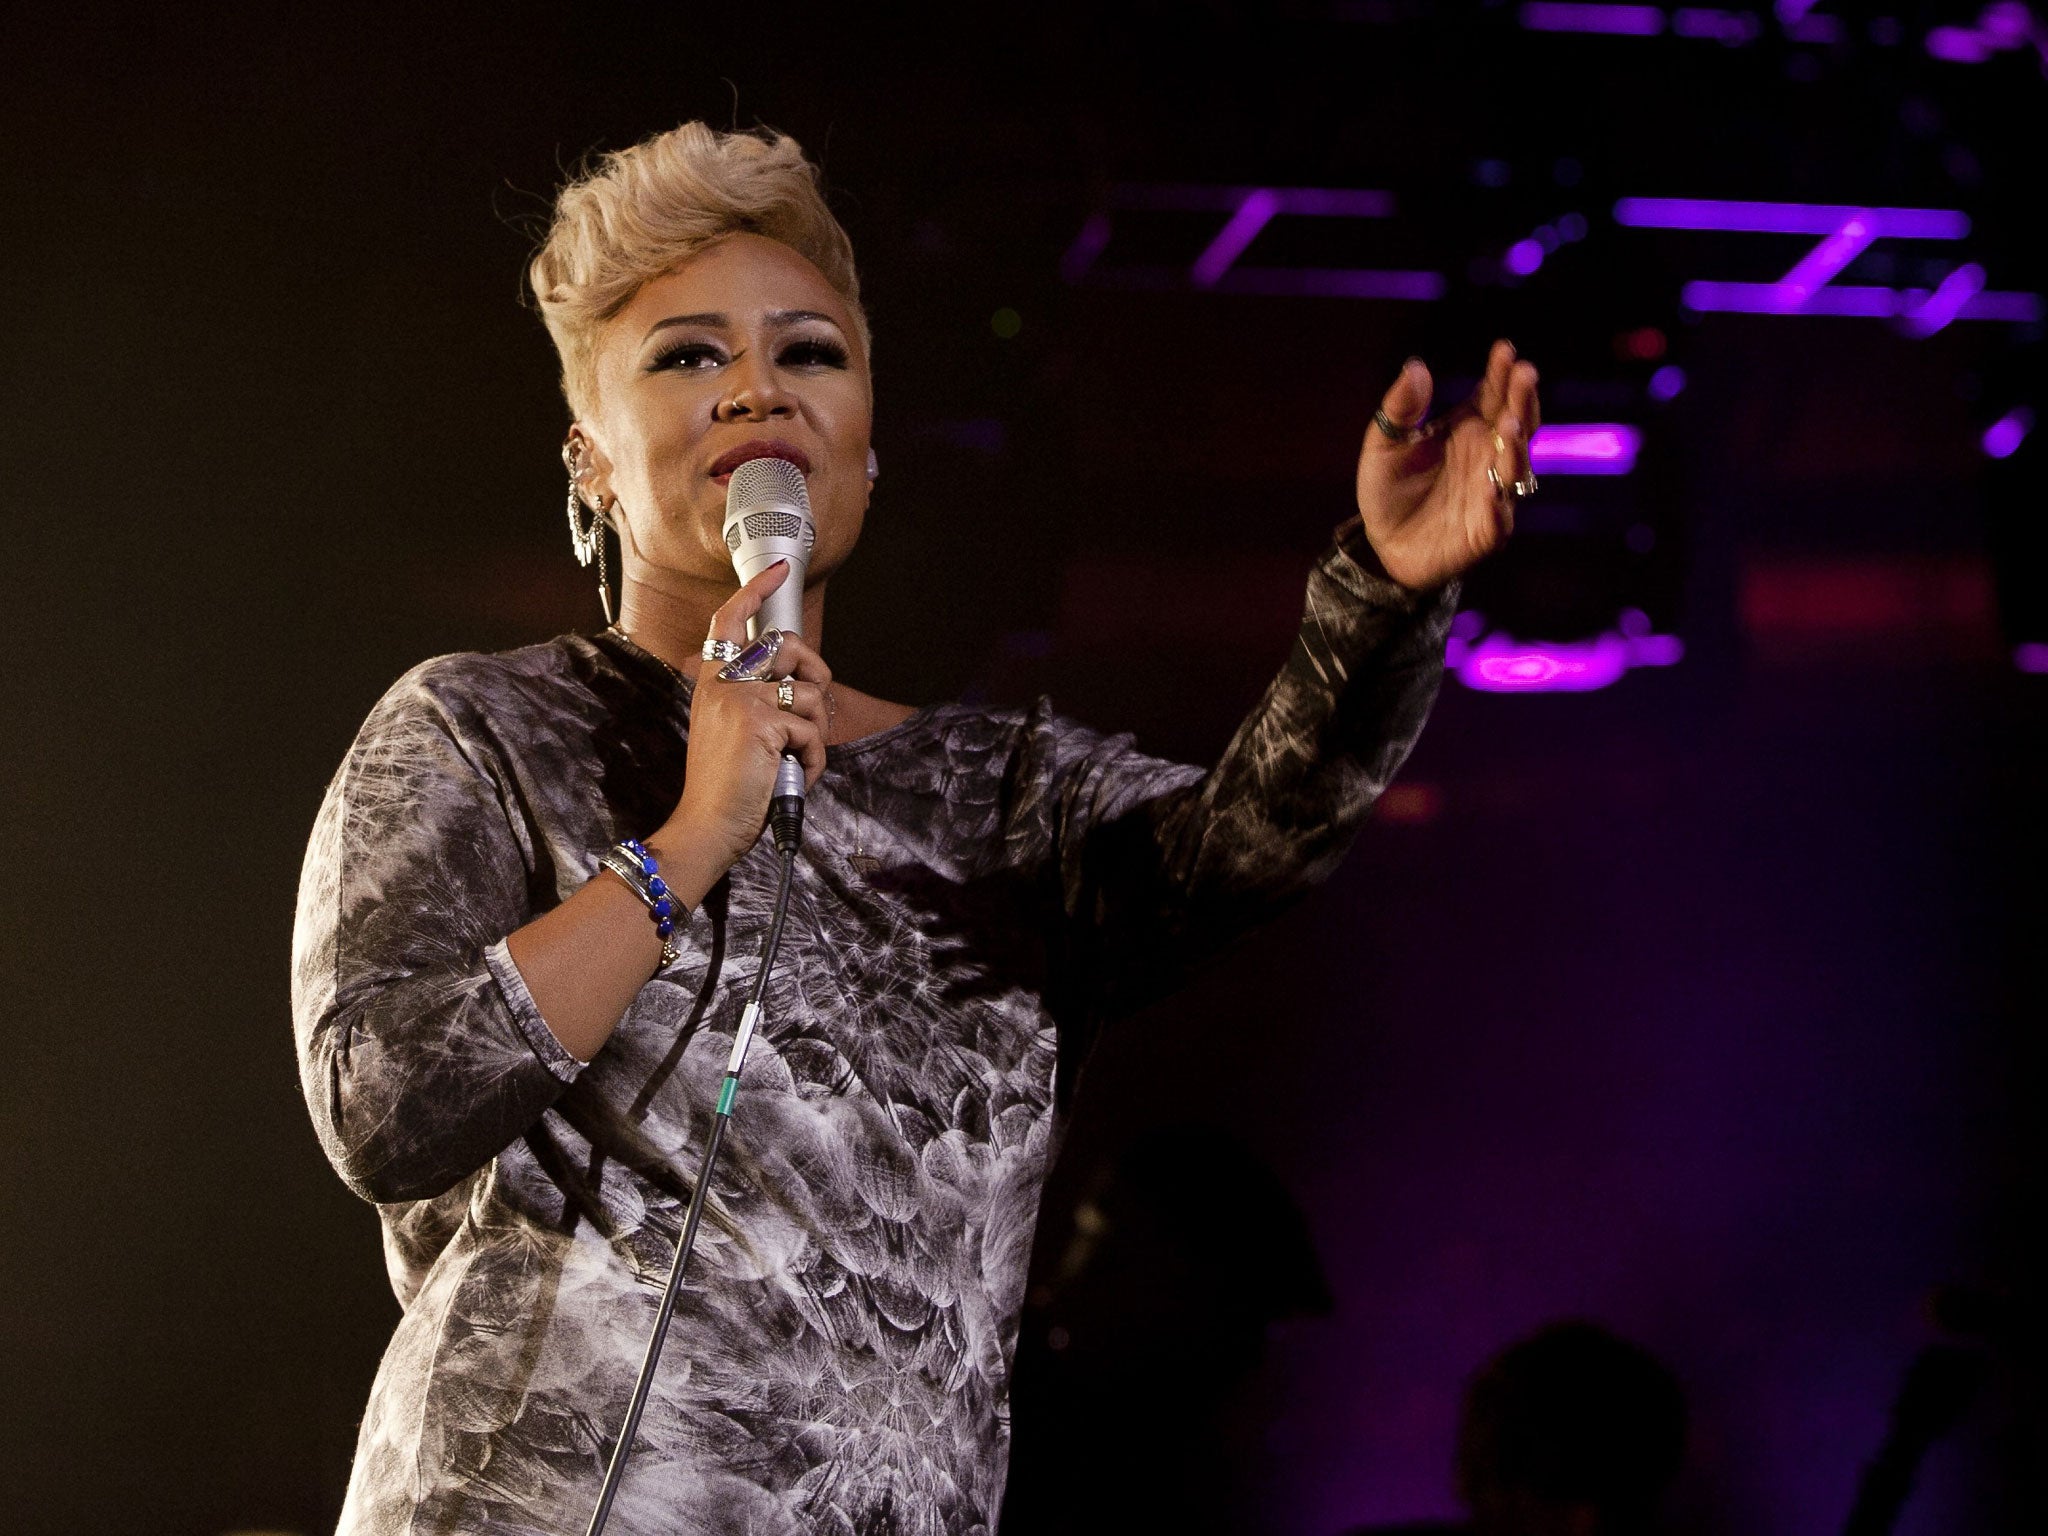 Could Emeli Sandé be the first artist to grace the stage at the Olympic Stadium?